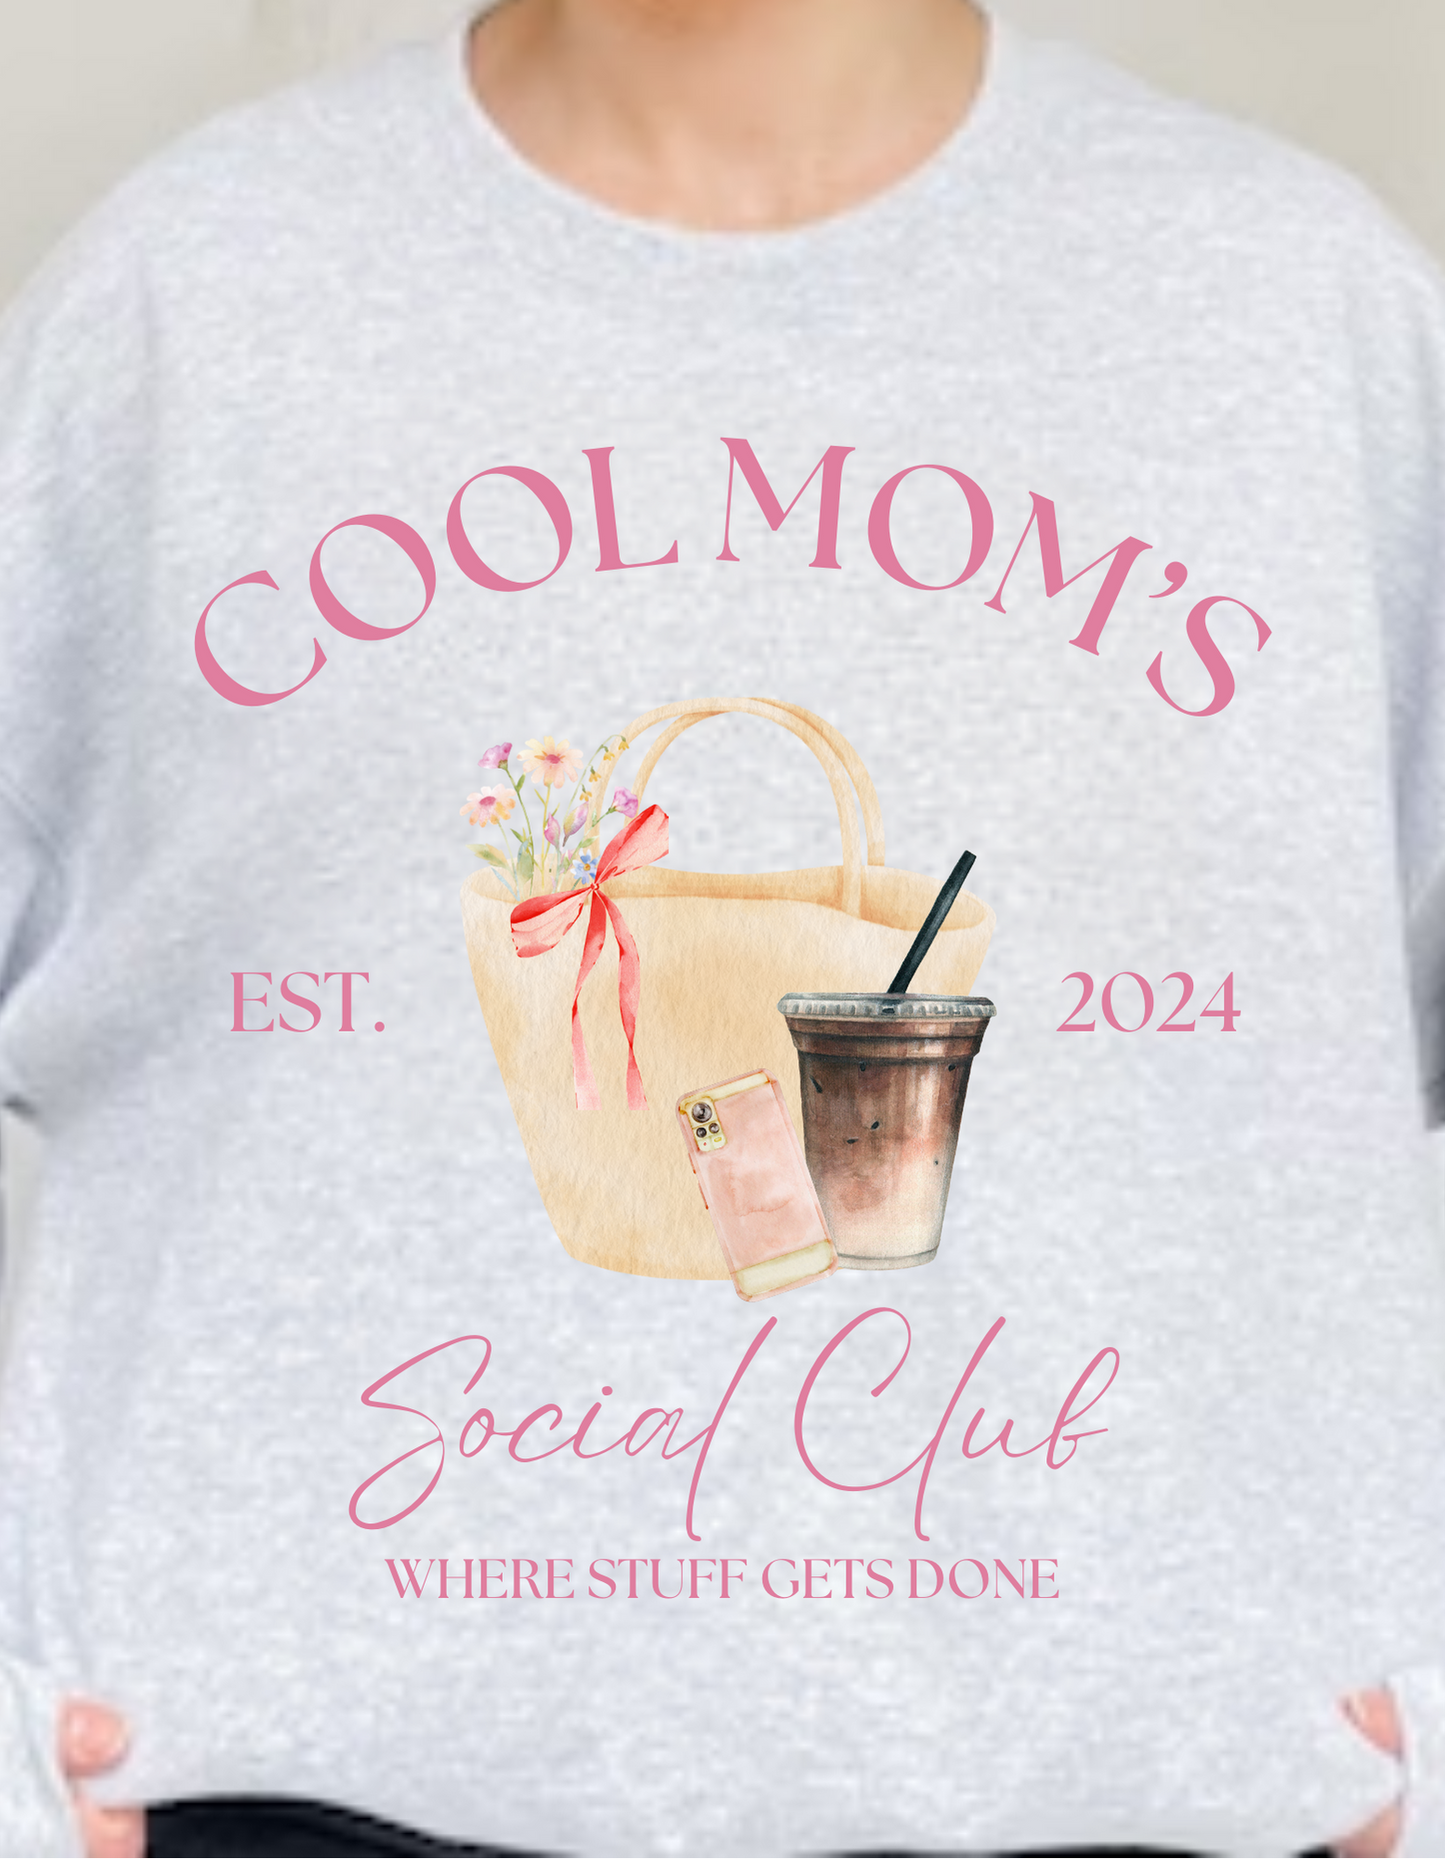 Cool Moms Social Club Adult Pullovers